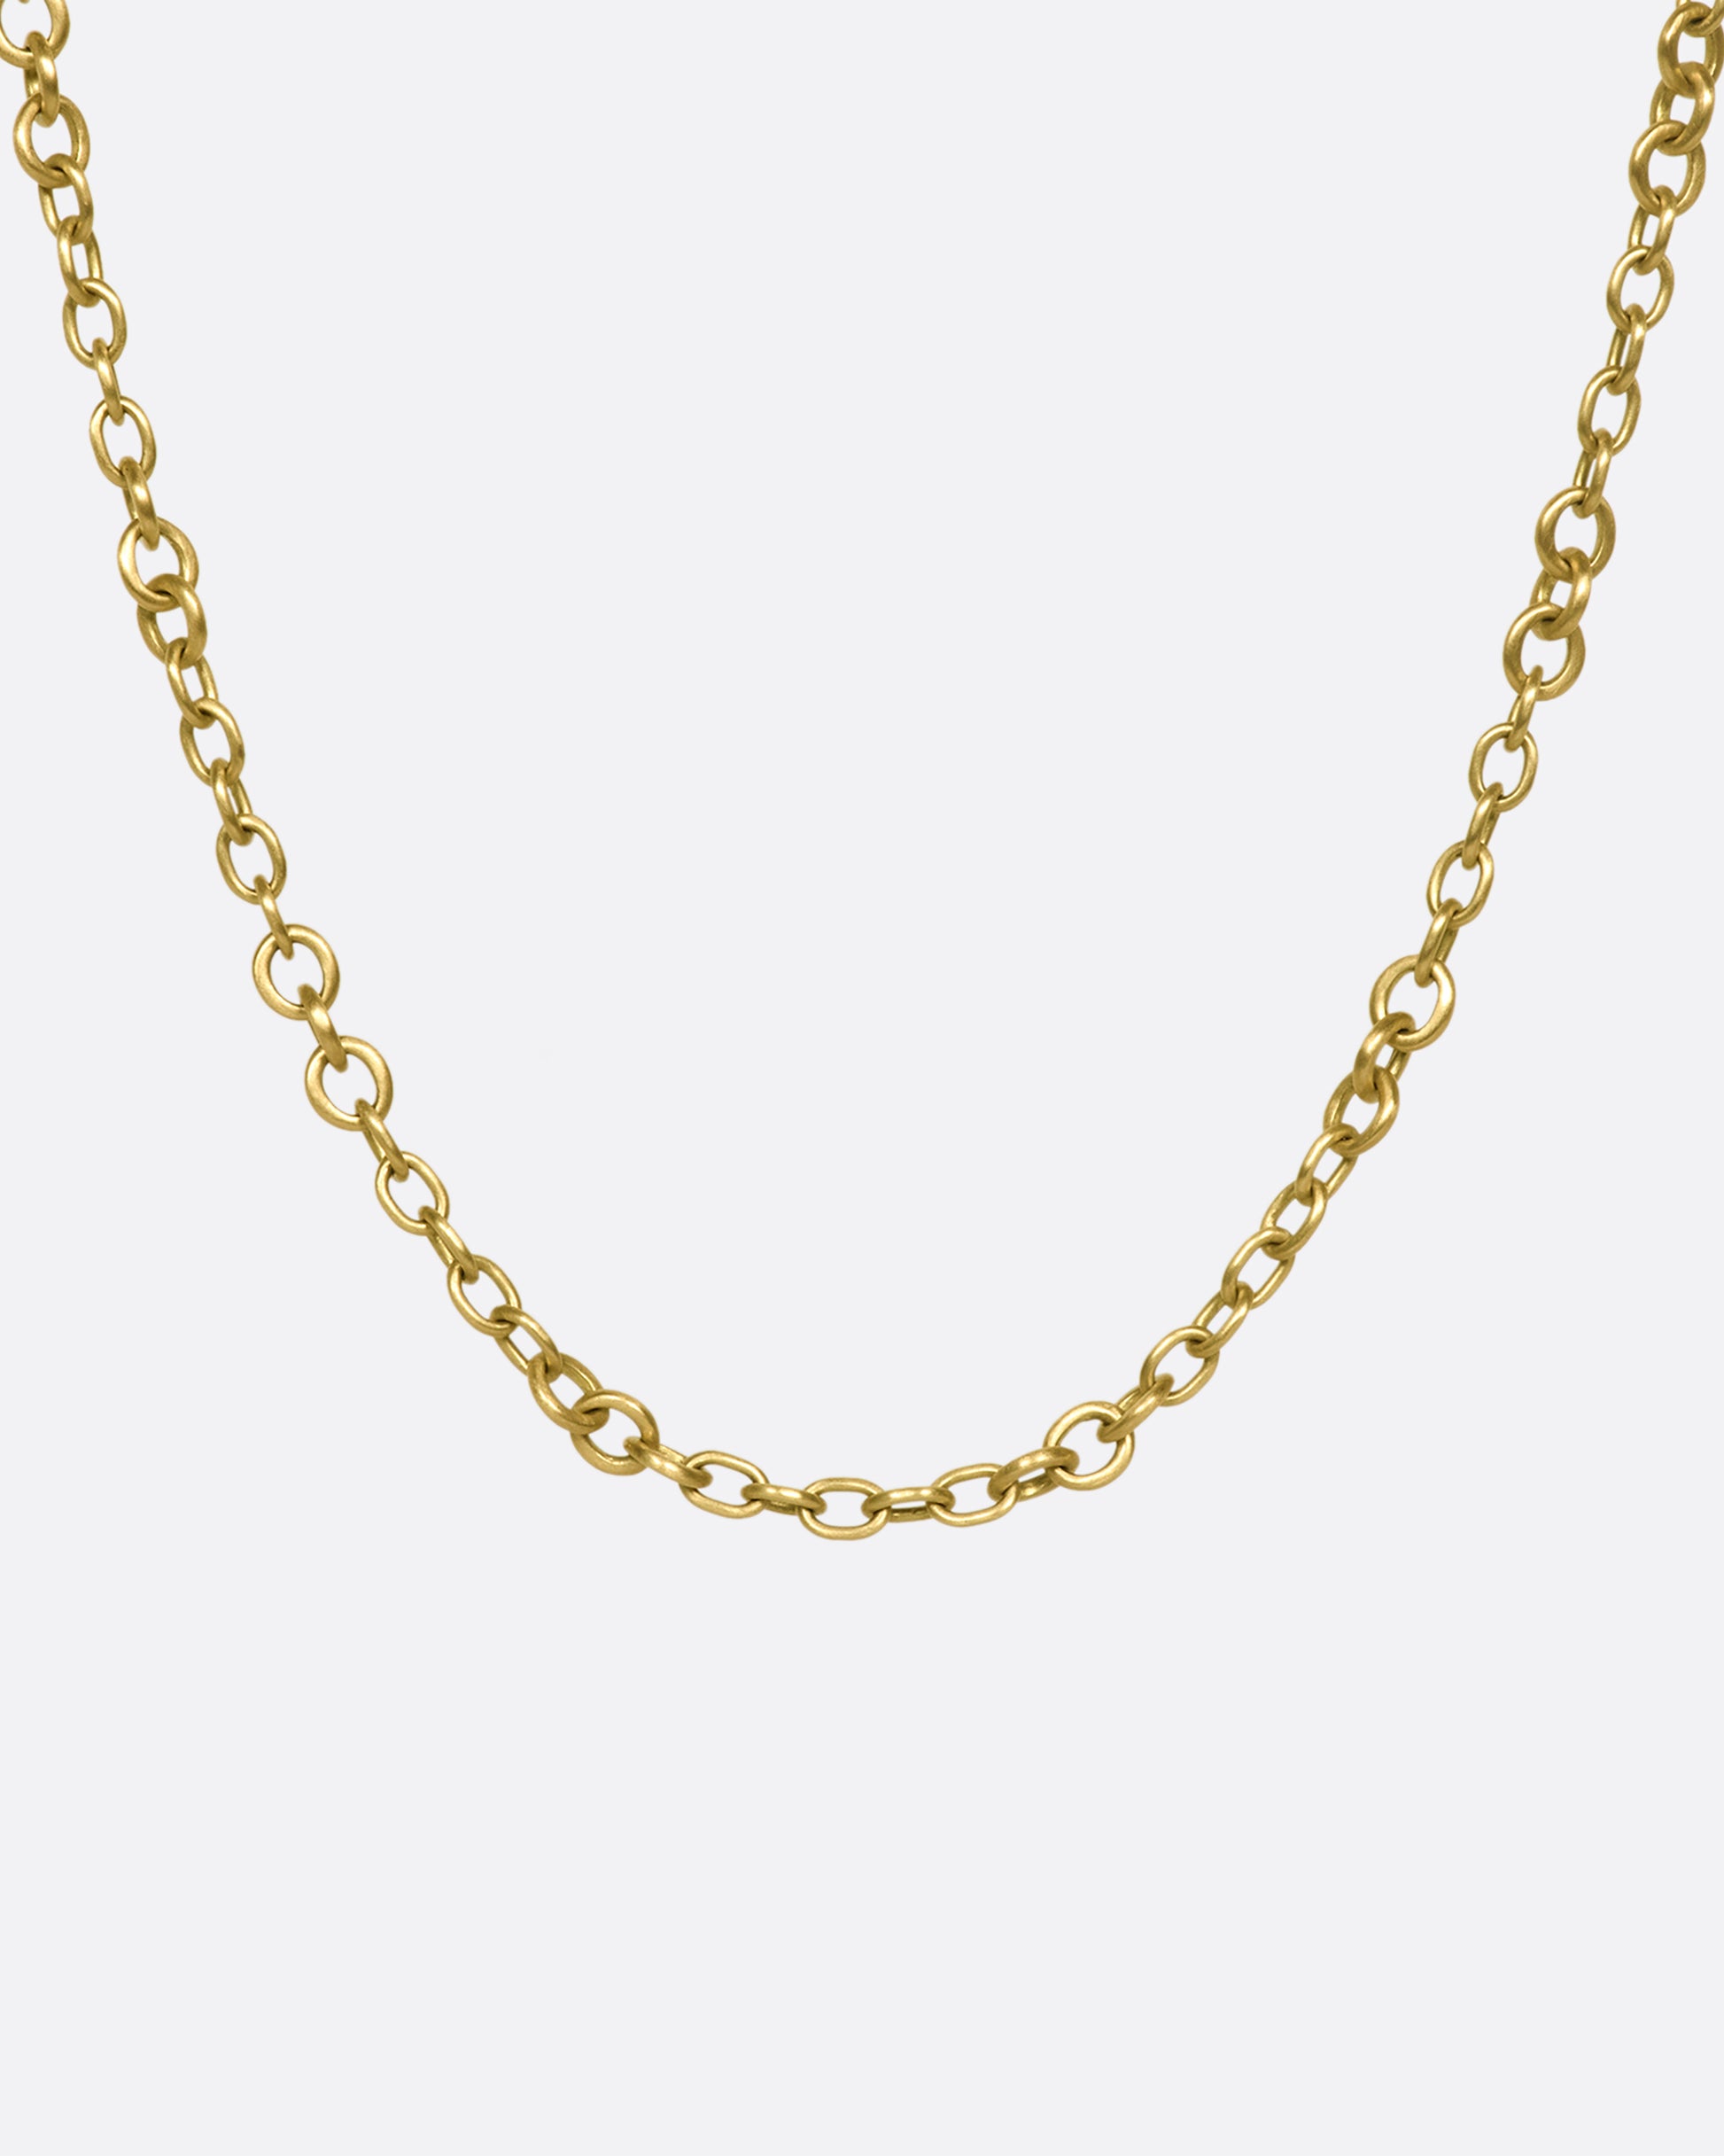 A beautiful 18K gold chain that will rest along your collar bone. Heavy enough to wear on its own in a neck mess and fine enough to add a pendant or two.